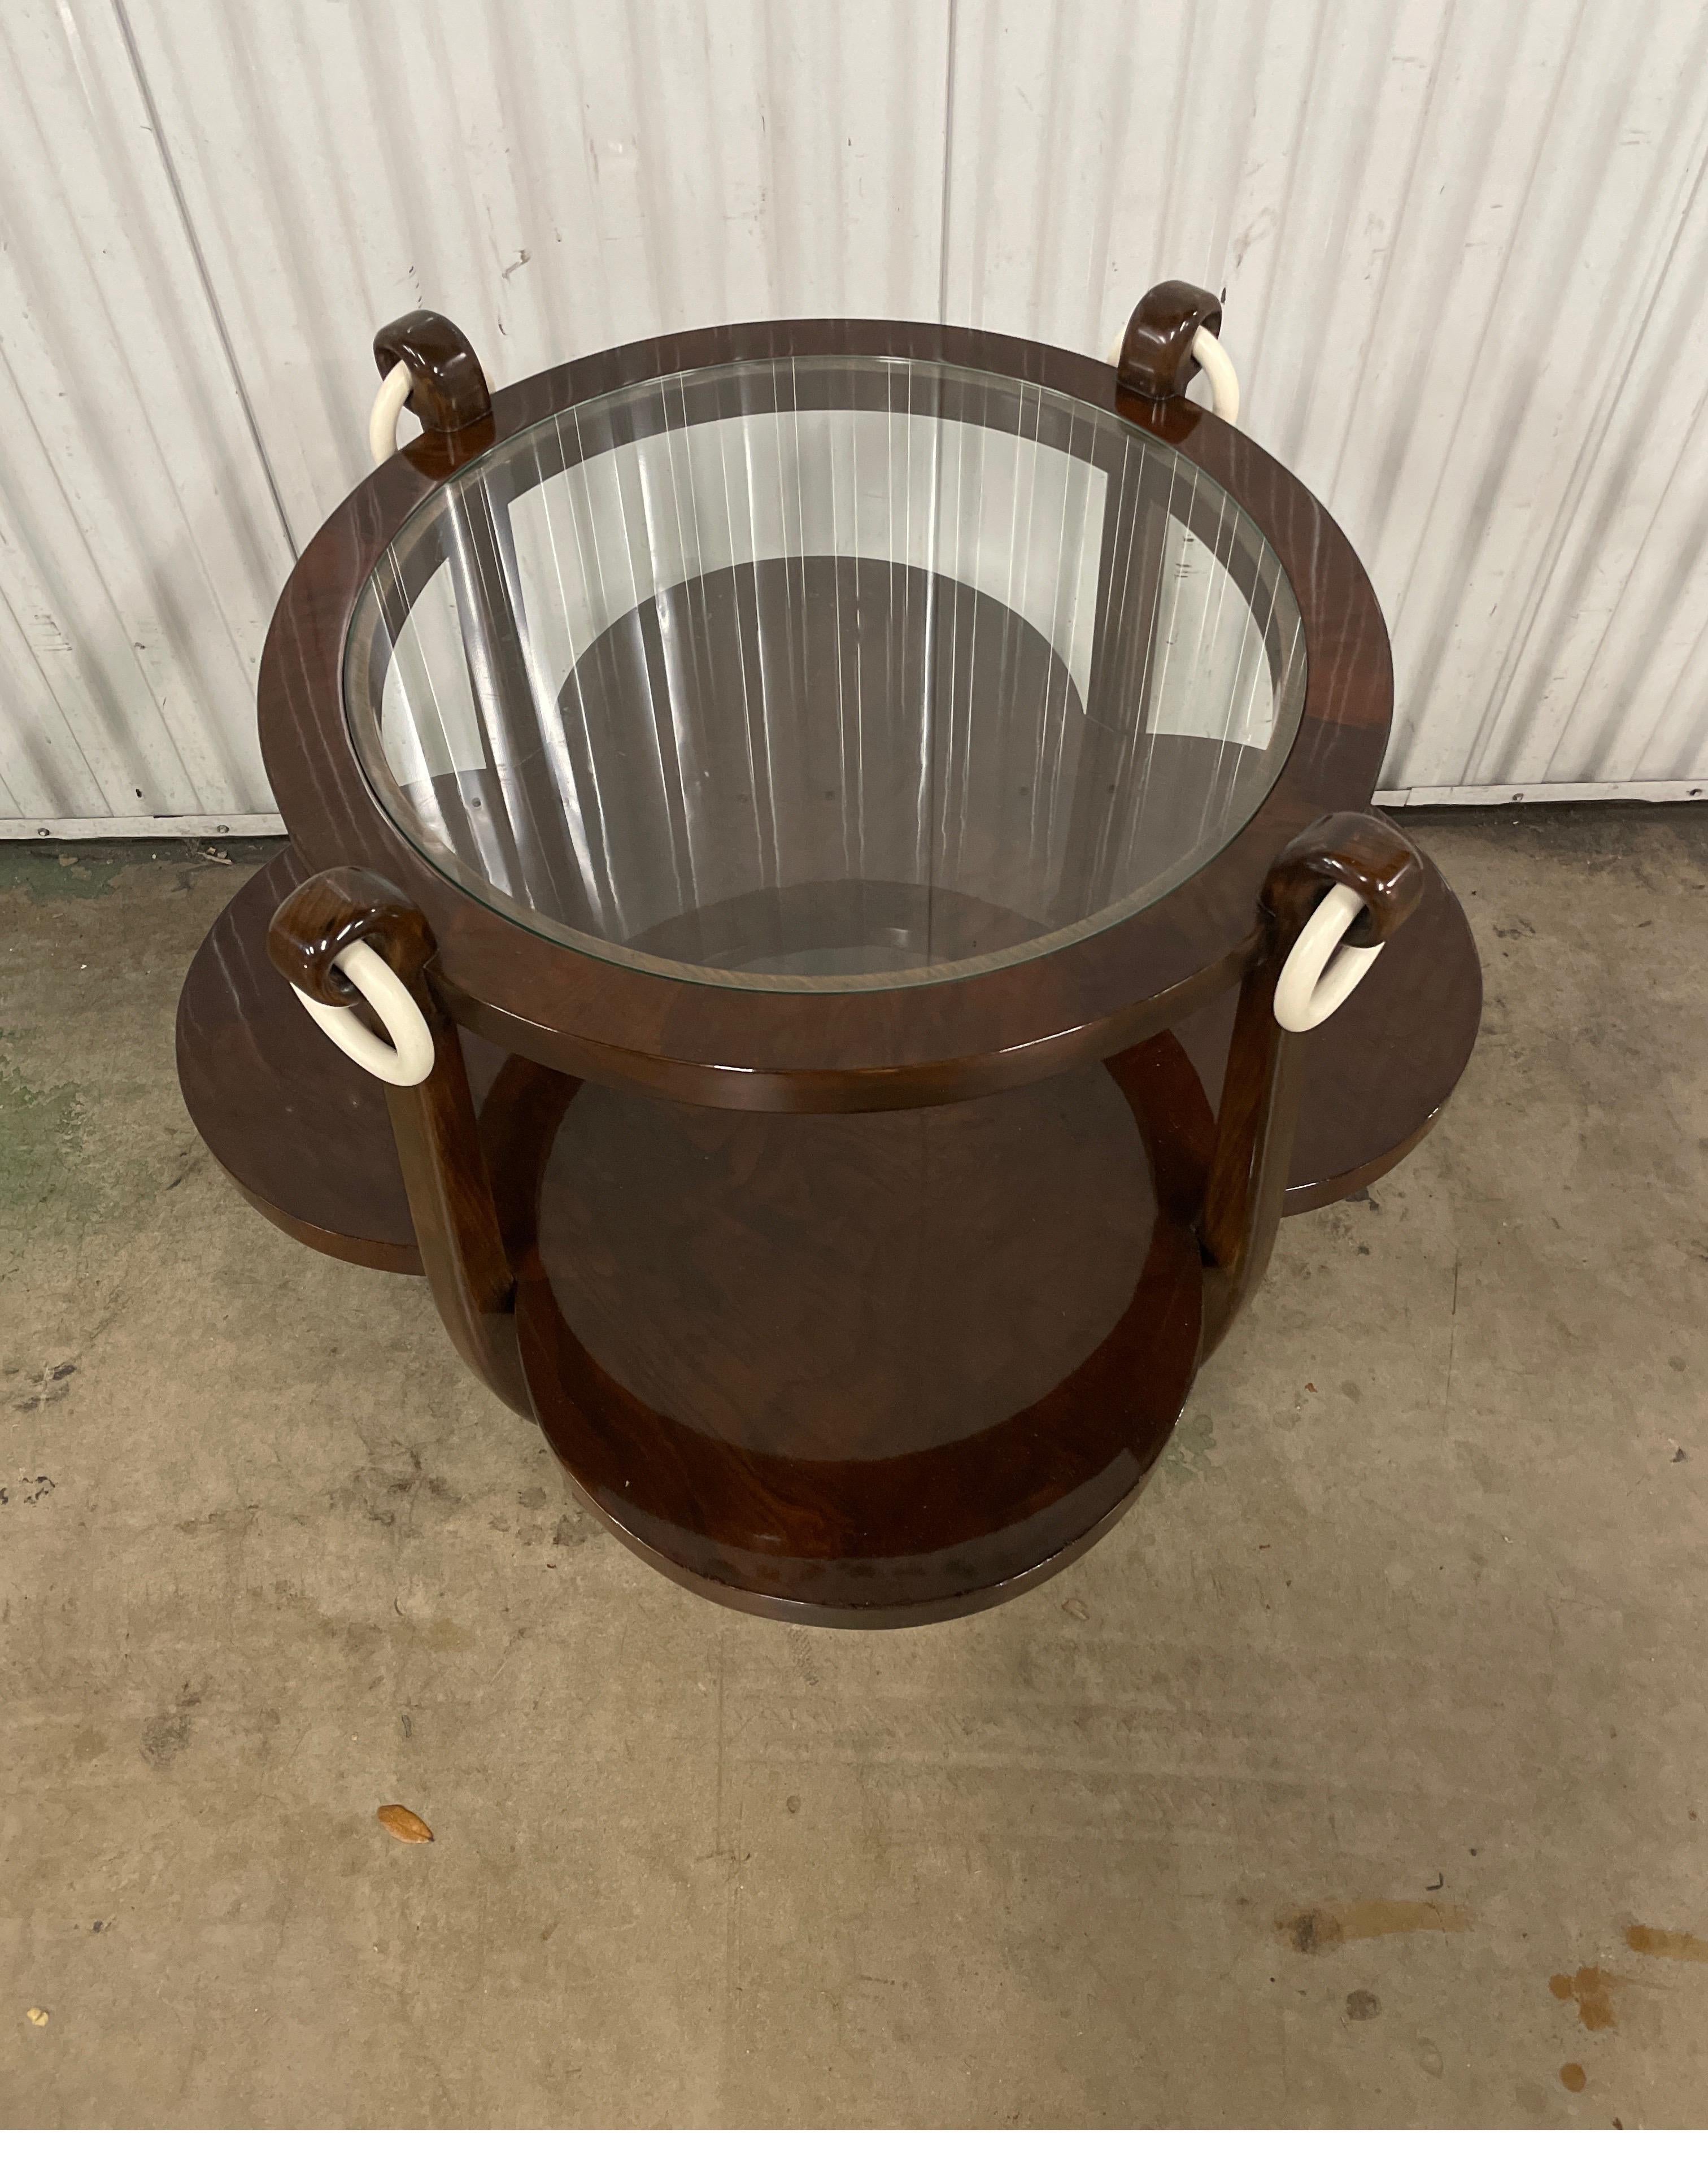 Art Deco Four Leaf Clover side table by Jules Leleu. The top is 22 inches in diameter with a glass insert. The bottom shelf is in the shape of a four leaf clover.